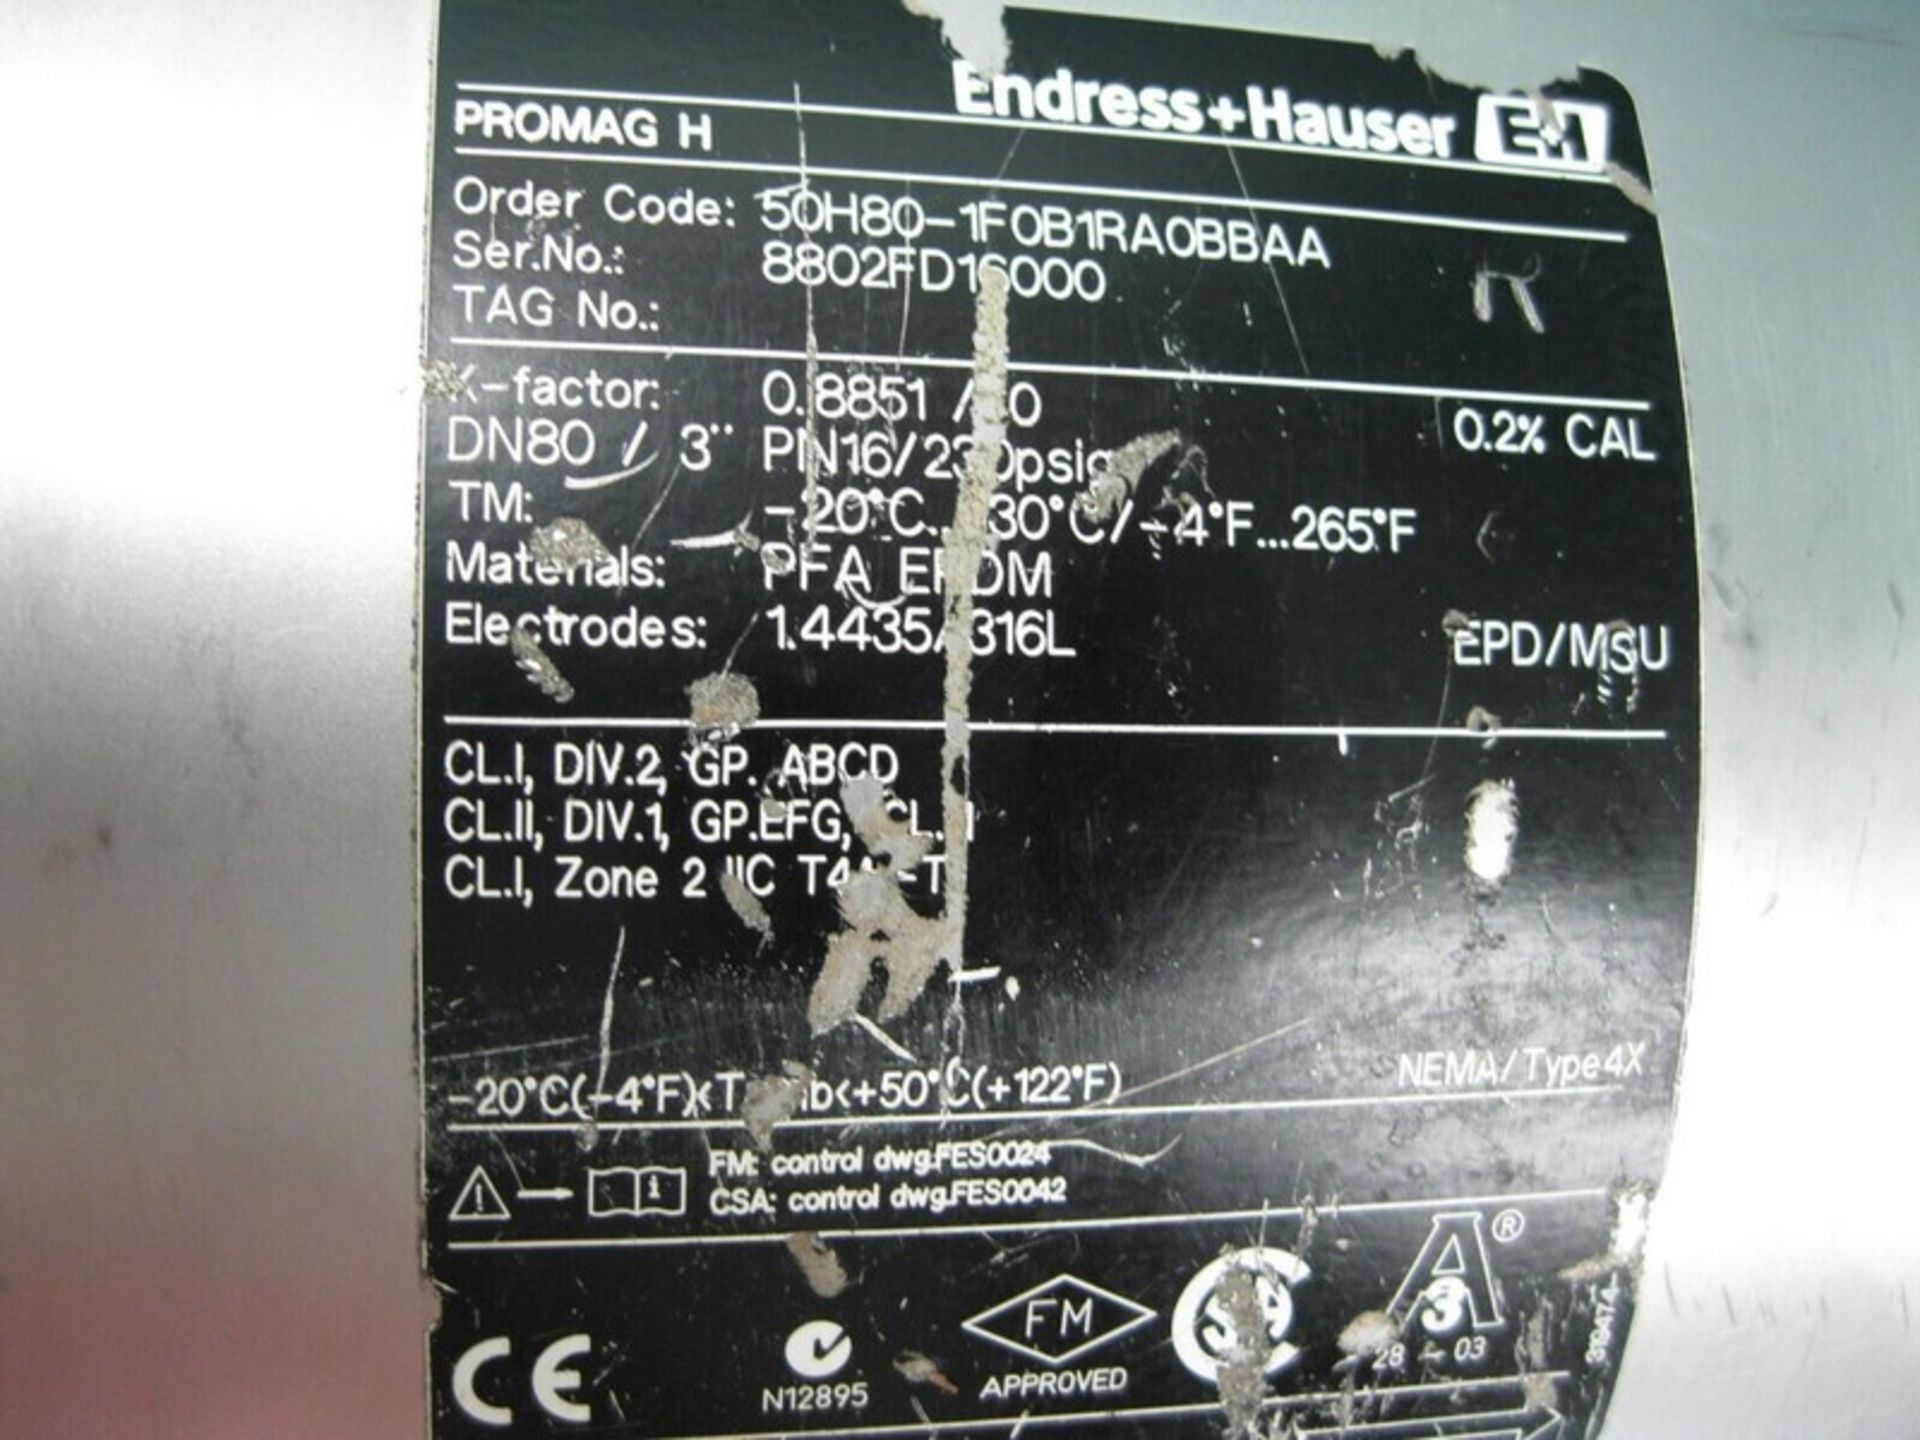 3" Endress Hauser 50H80-1F0B1RA0BBAA Promag 50 H Flowmeter (POWERED FOR AC ONLY - NO DC POWER) - Image 5 of 8